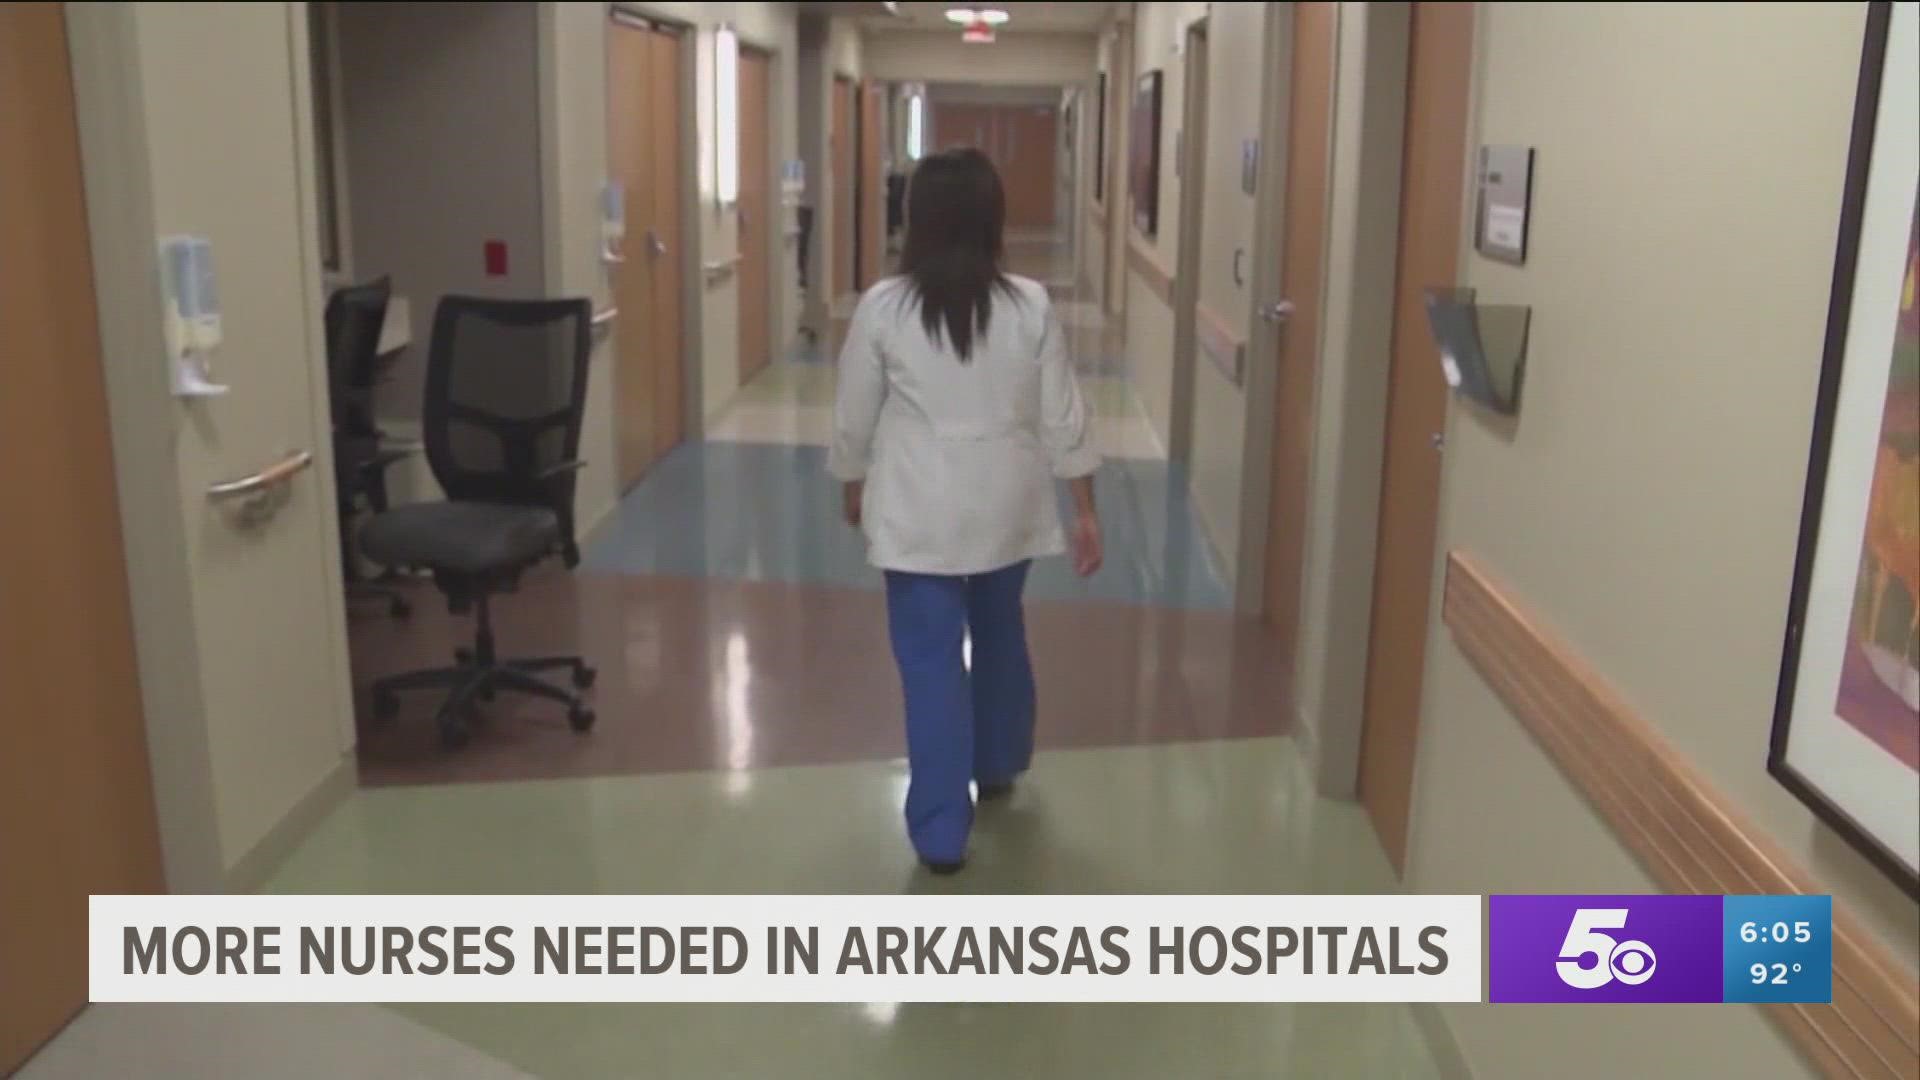 Fatigue and burnout have left many nurses leaving the state for other opportunities.